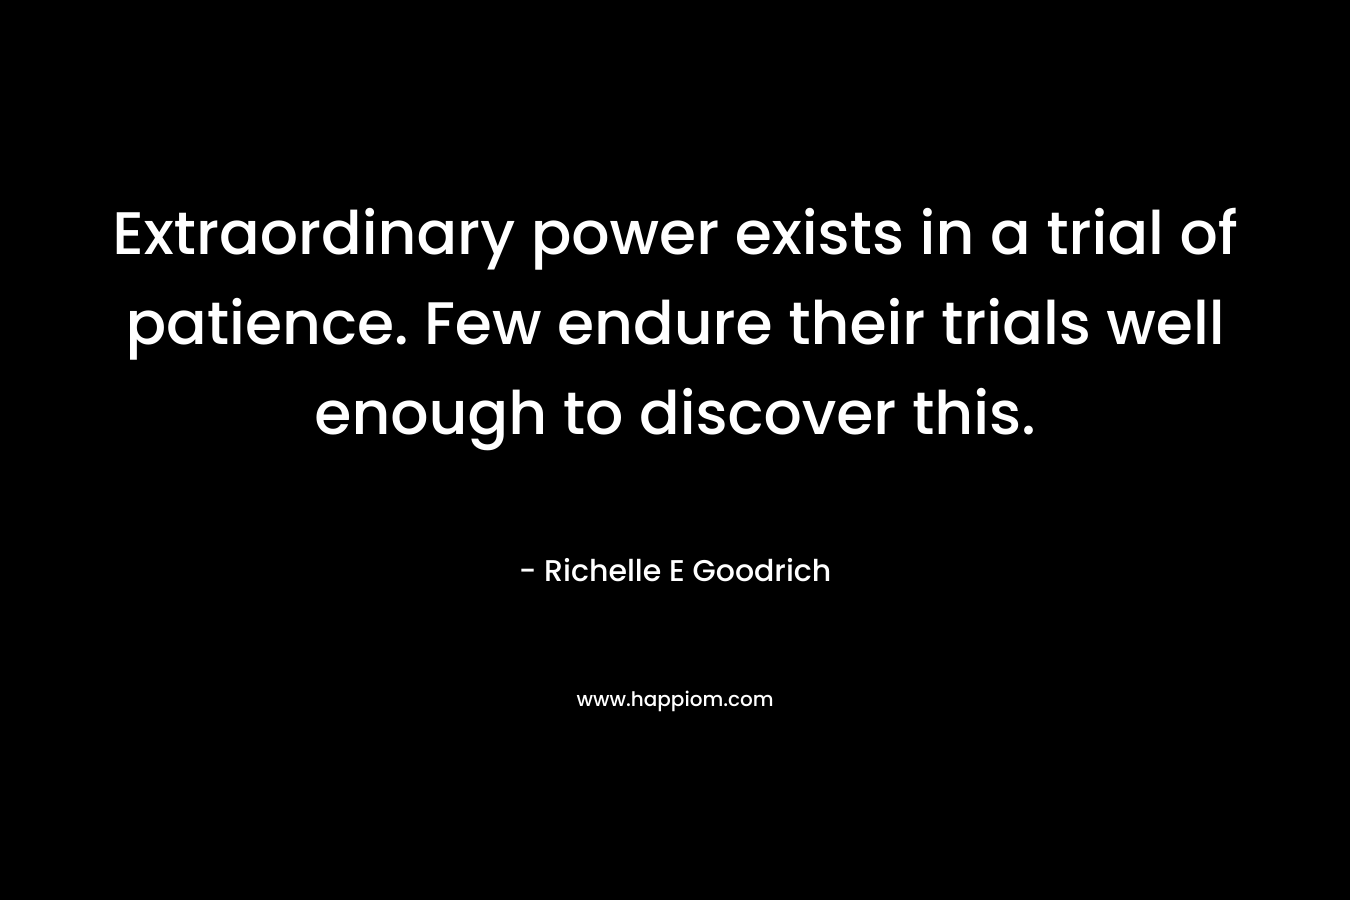 Extraordinary power exists in a trial of patience. Few endure their trials well enough to discover this. – Richelle E Goodrich